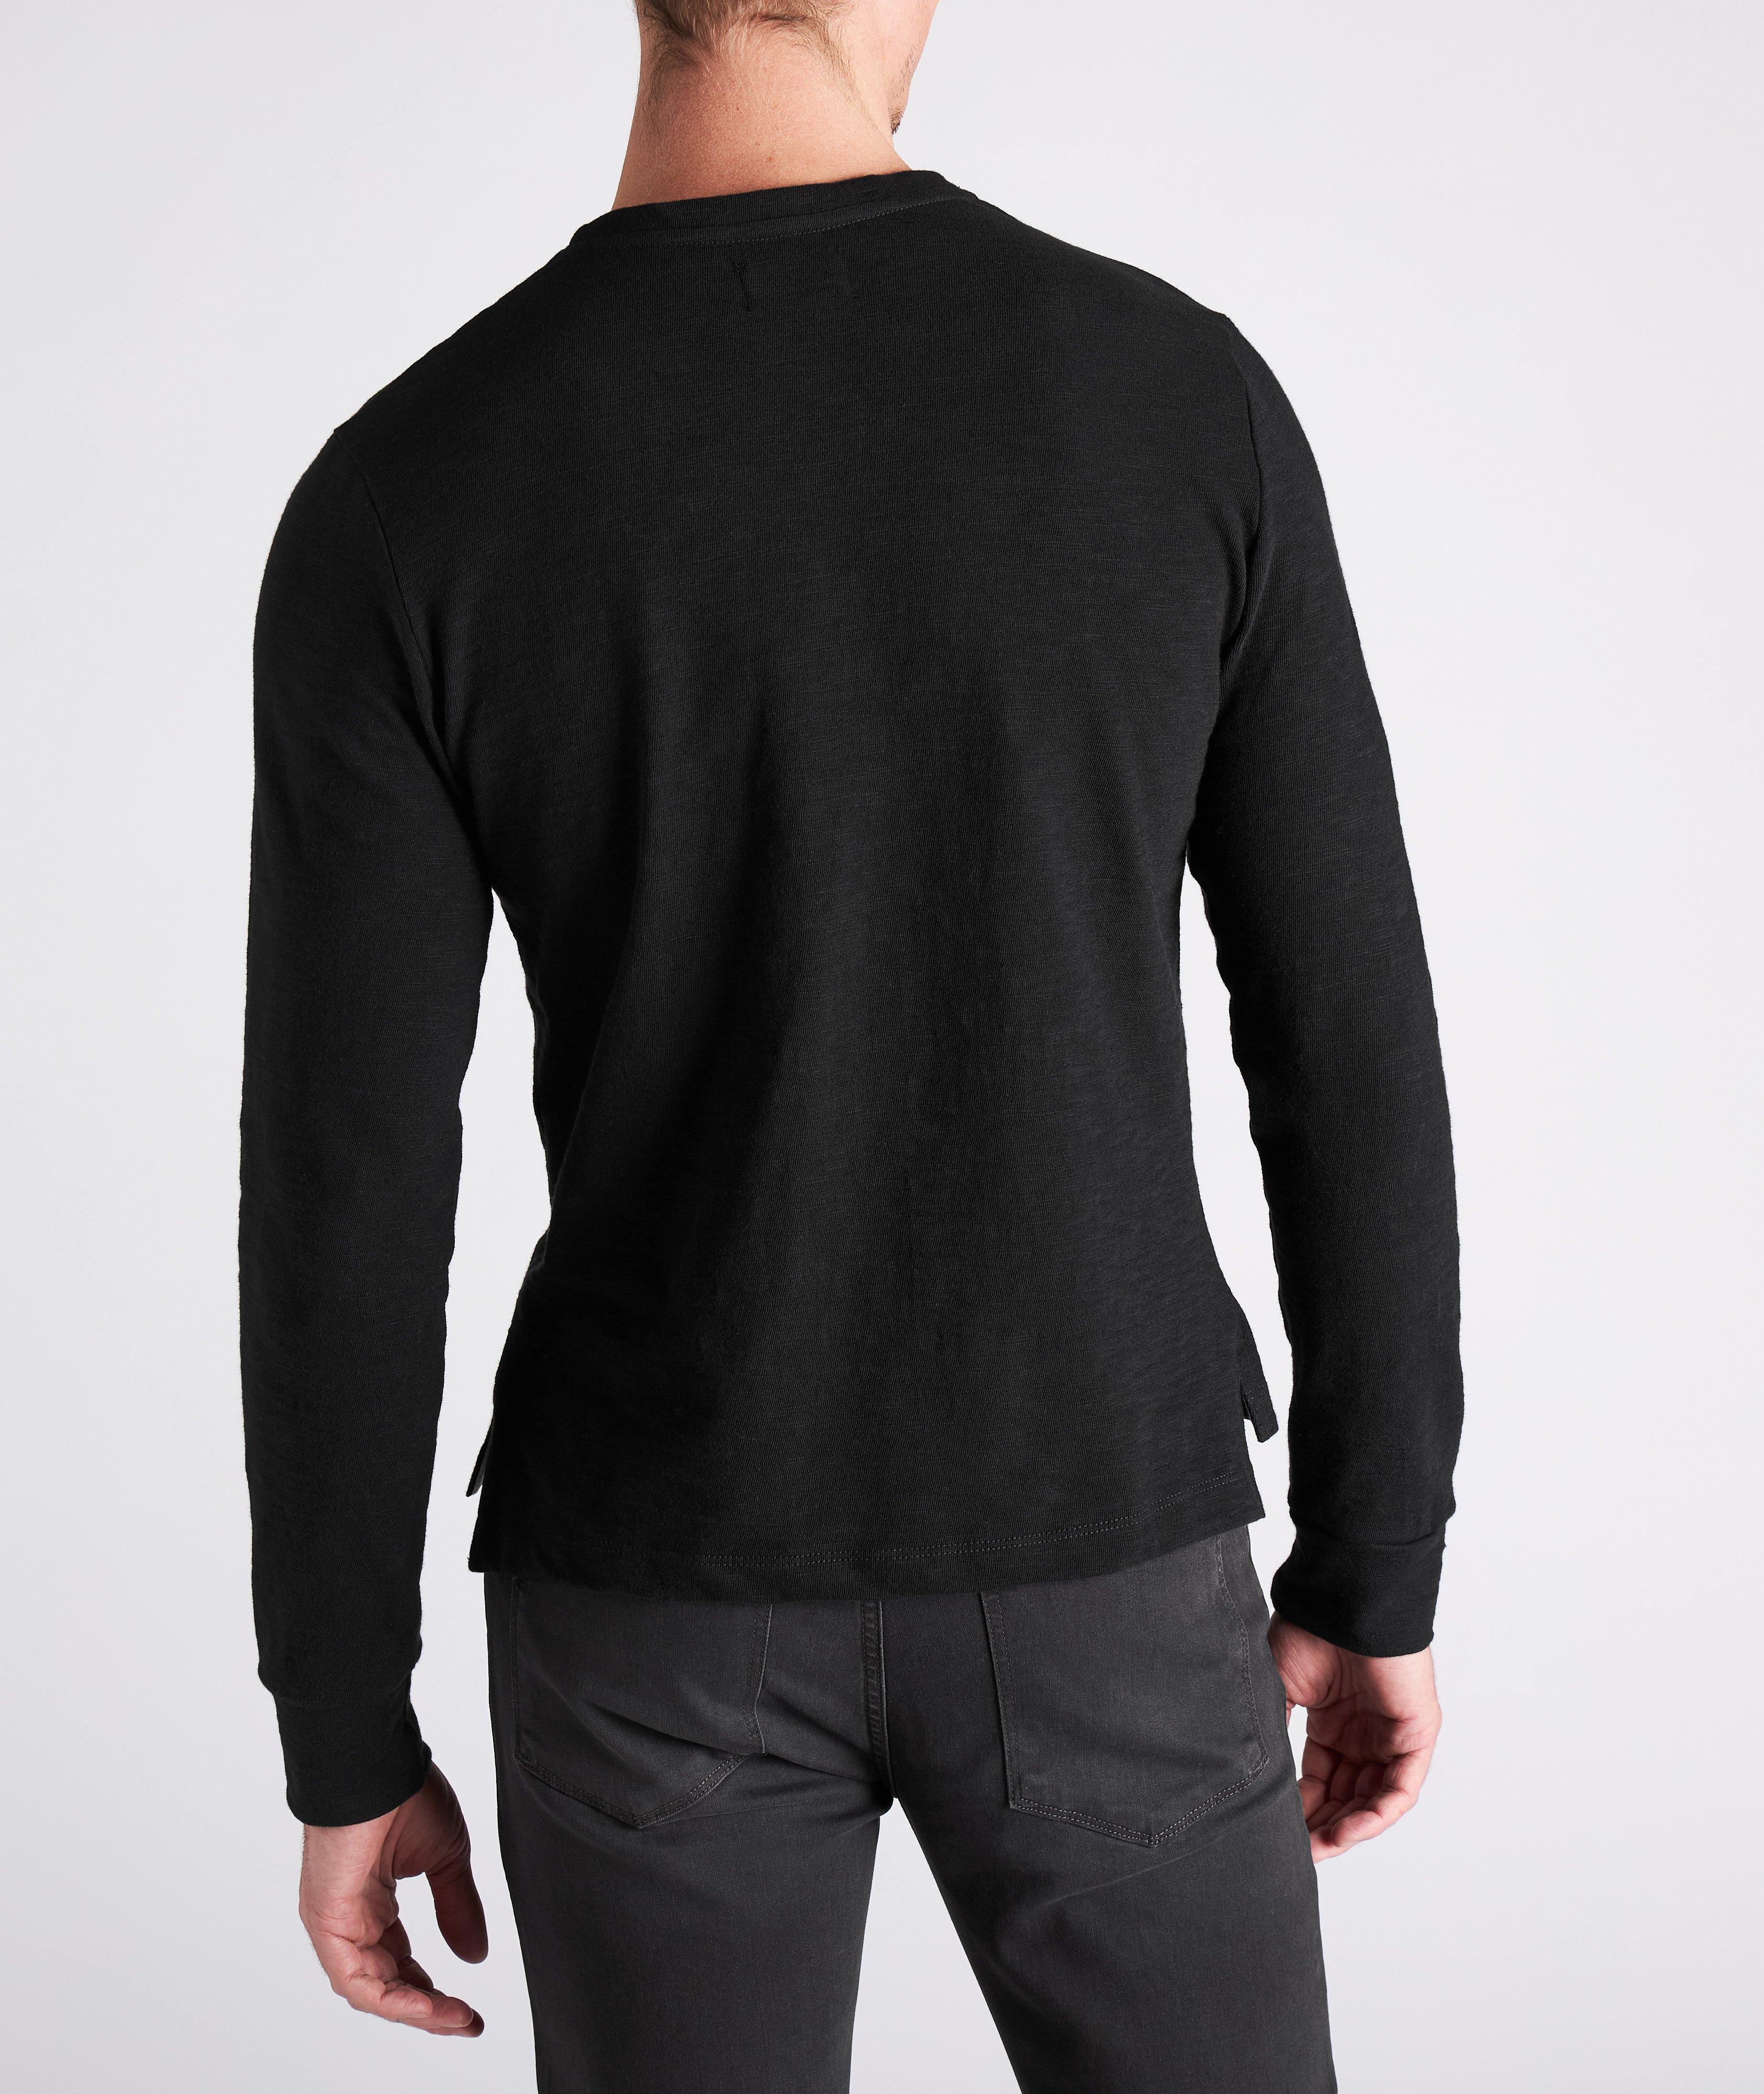 Outclass 416 Cotton Crew Neck Sweater | Sweaters & Knits | Final Cut